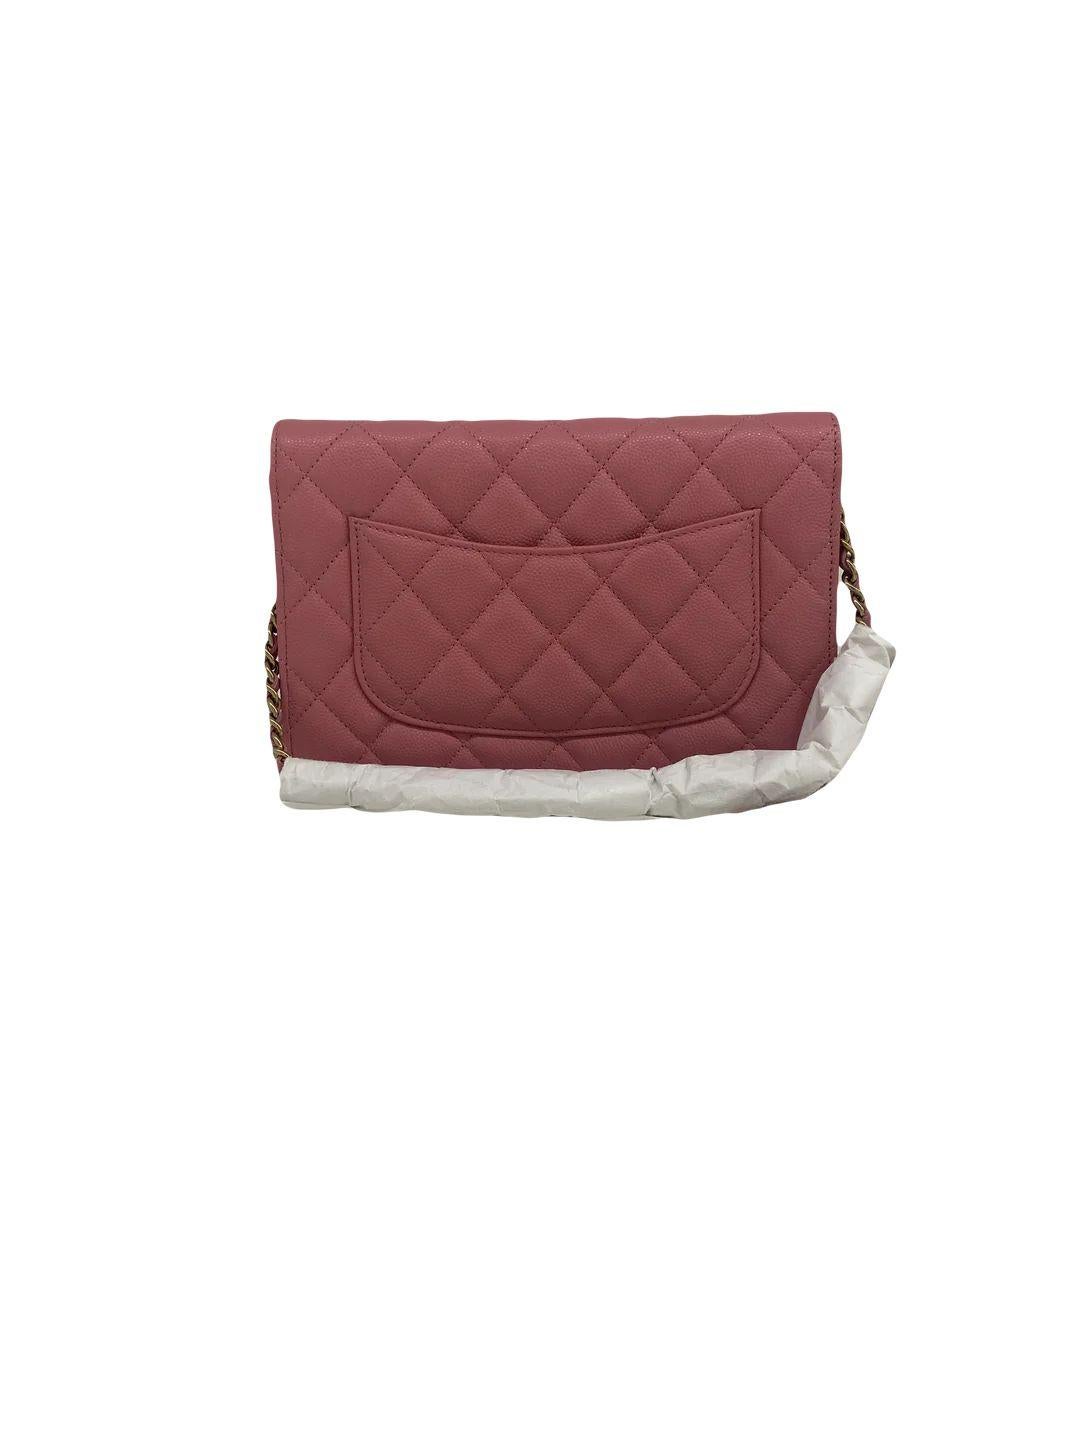 Chanel WOC Pink Caviar Leather 1